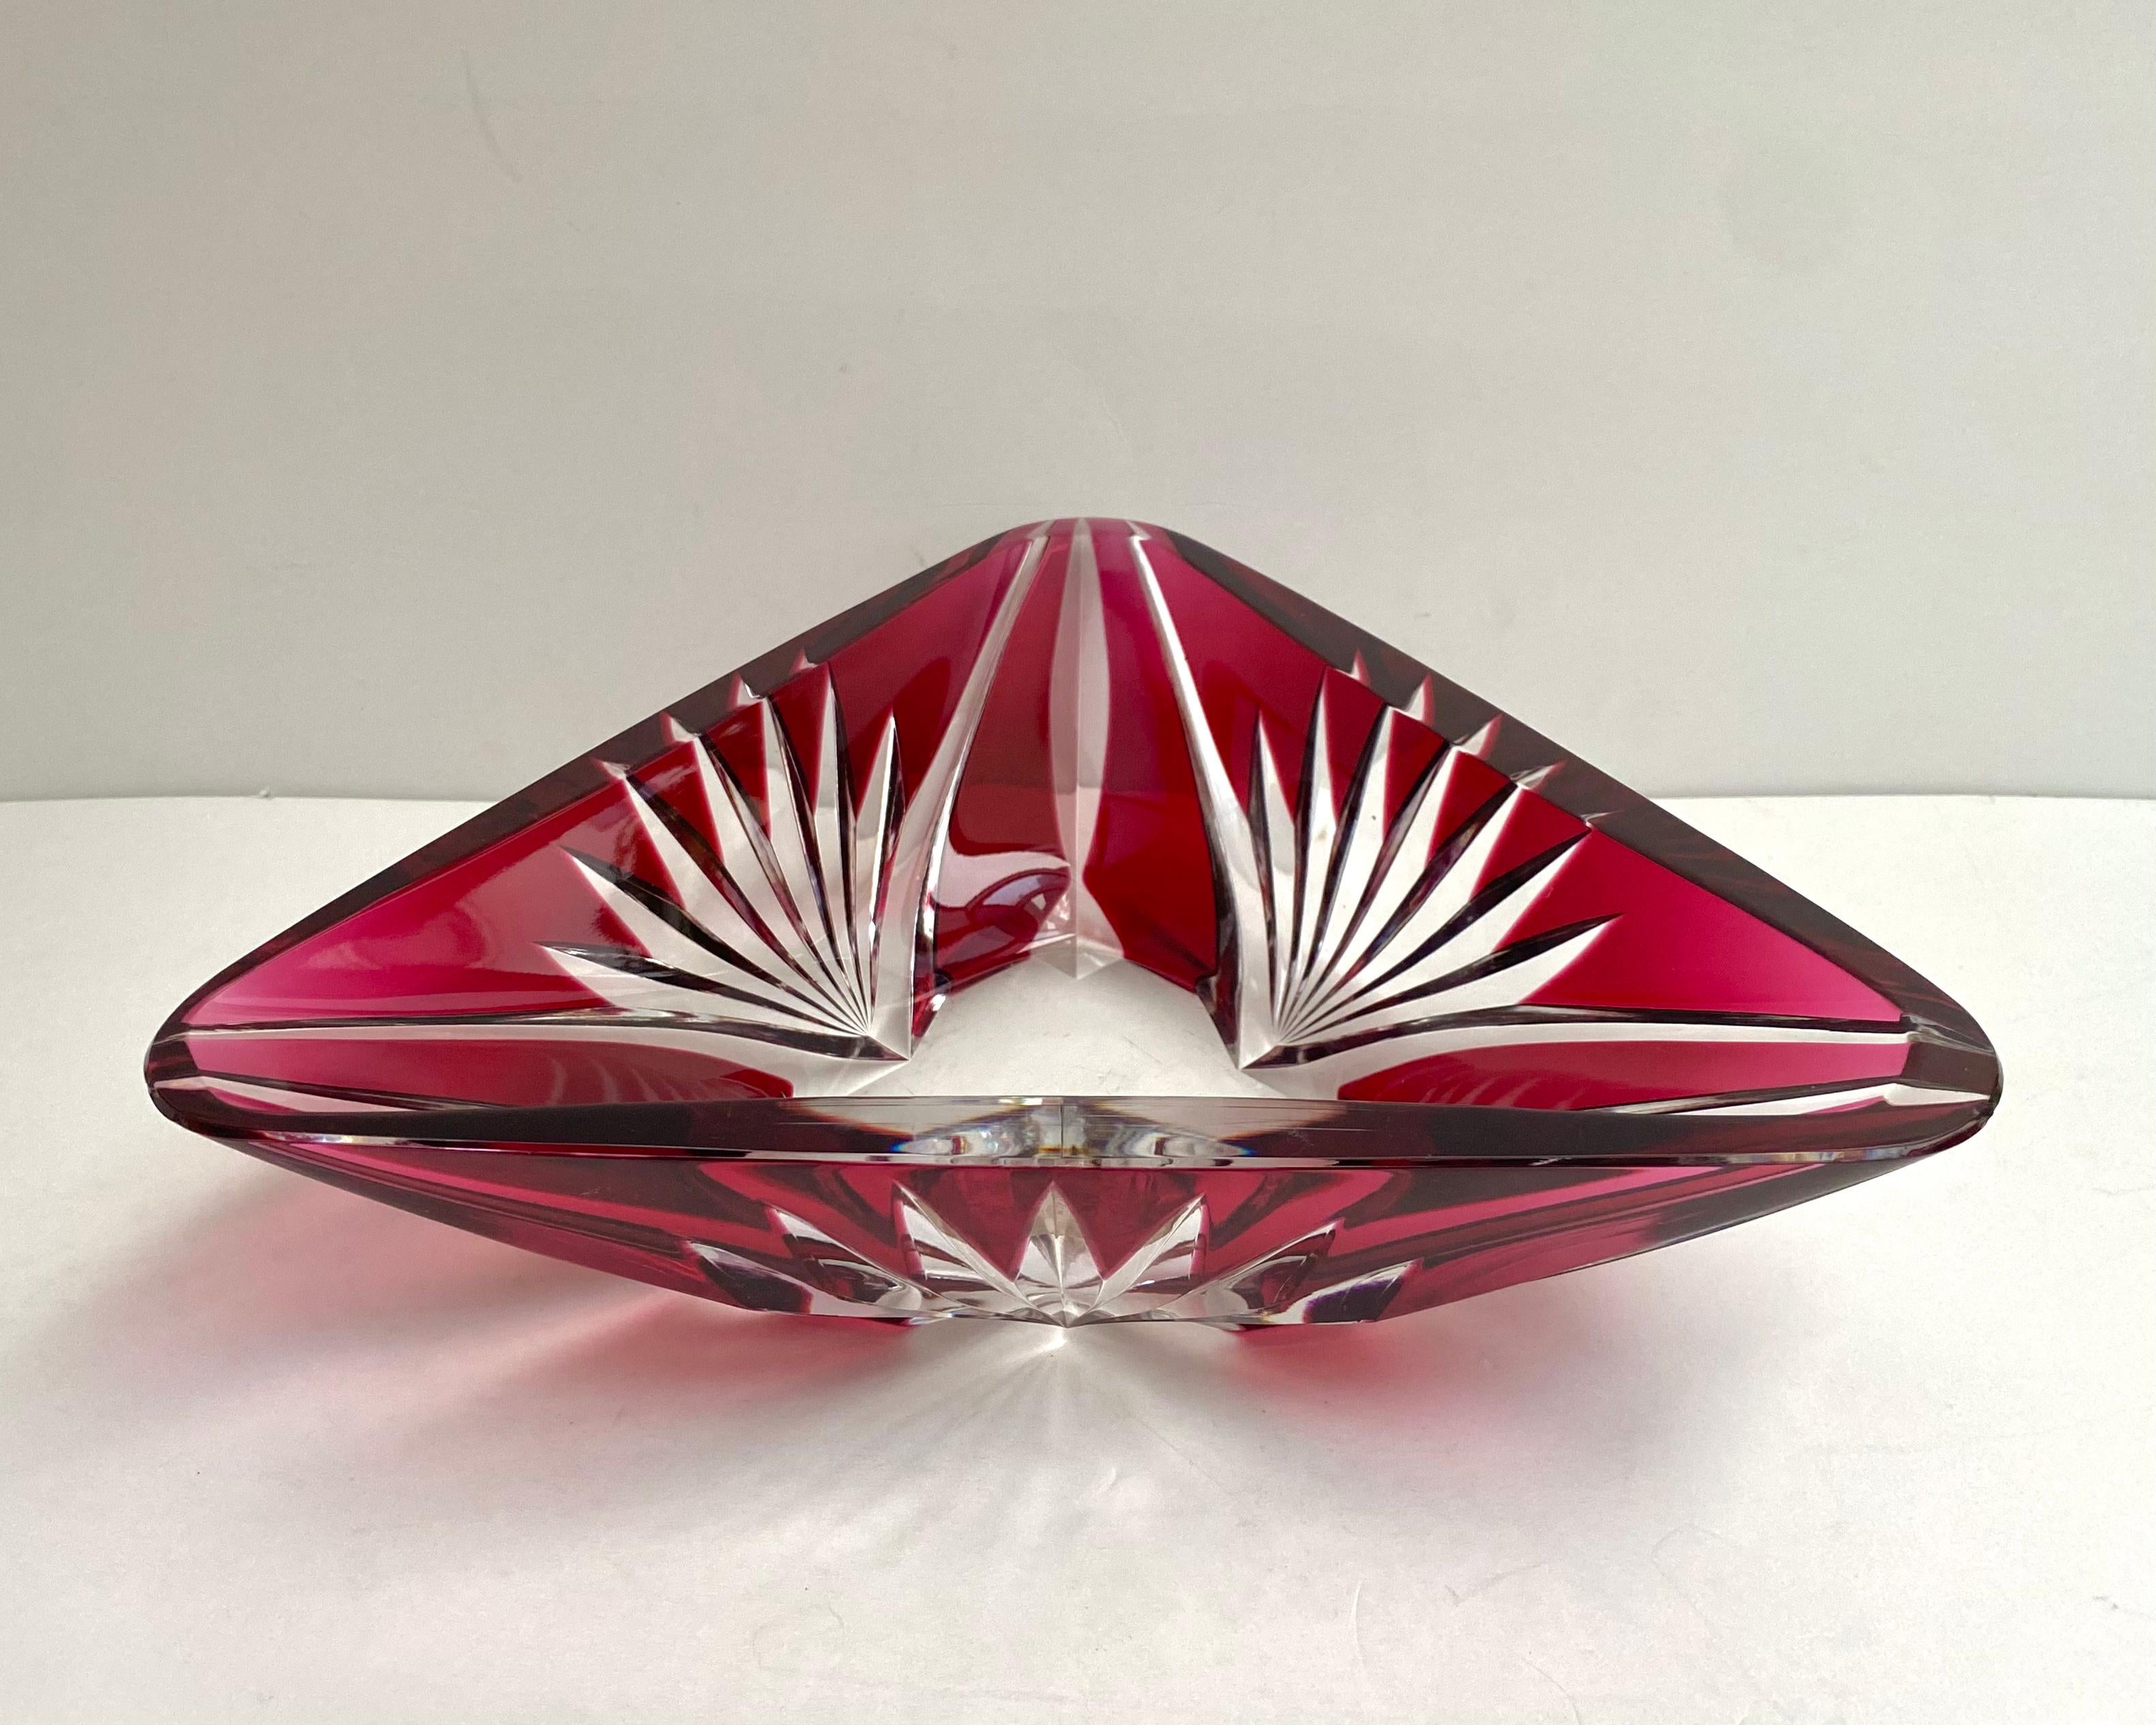 Vintage triangular vase / fruit bowl from the world leader in crystal production - the Belgian company Val Saint Lambert - founded in 1826 in Serena.

Vase handmade of double-layer crystal in the Art Deco style in a beautiful garnet color.

Produced